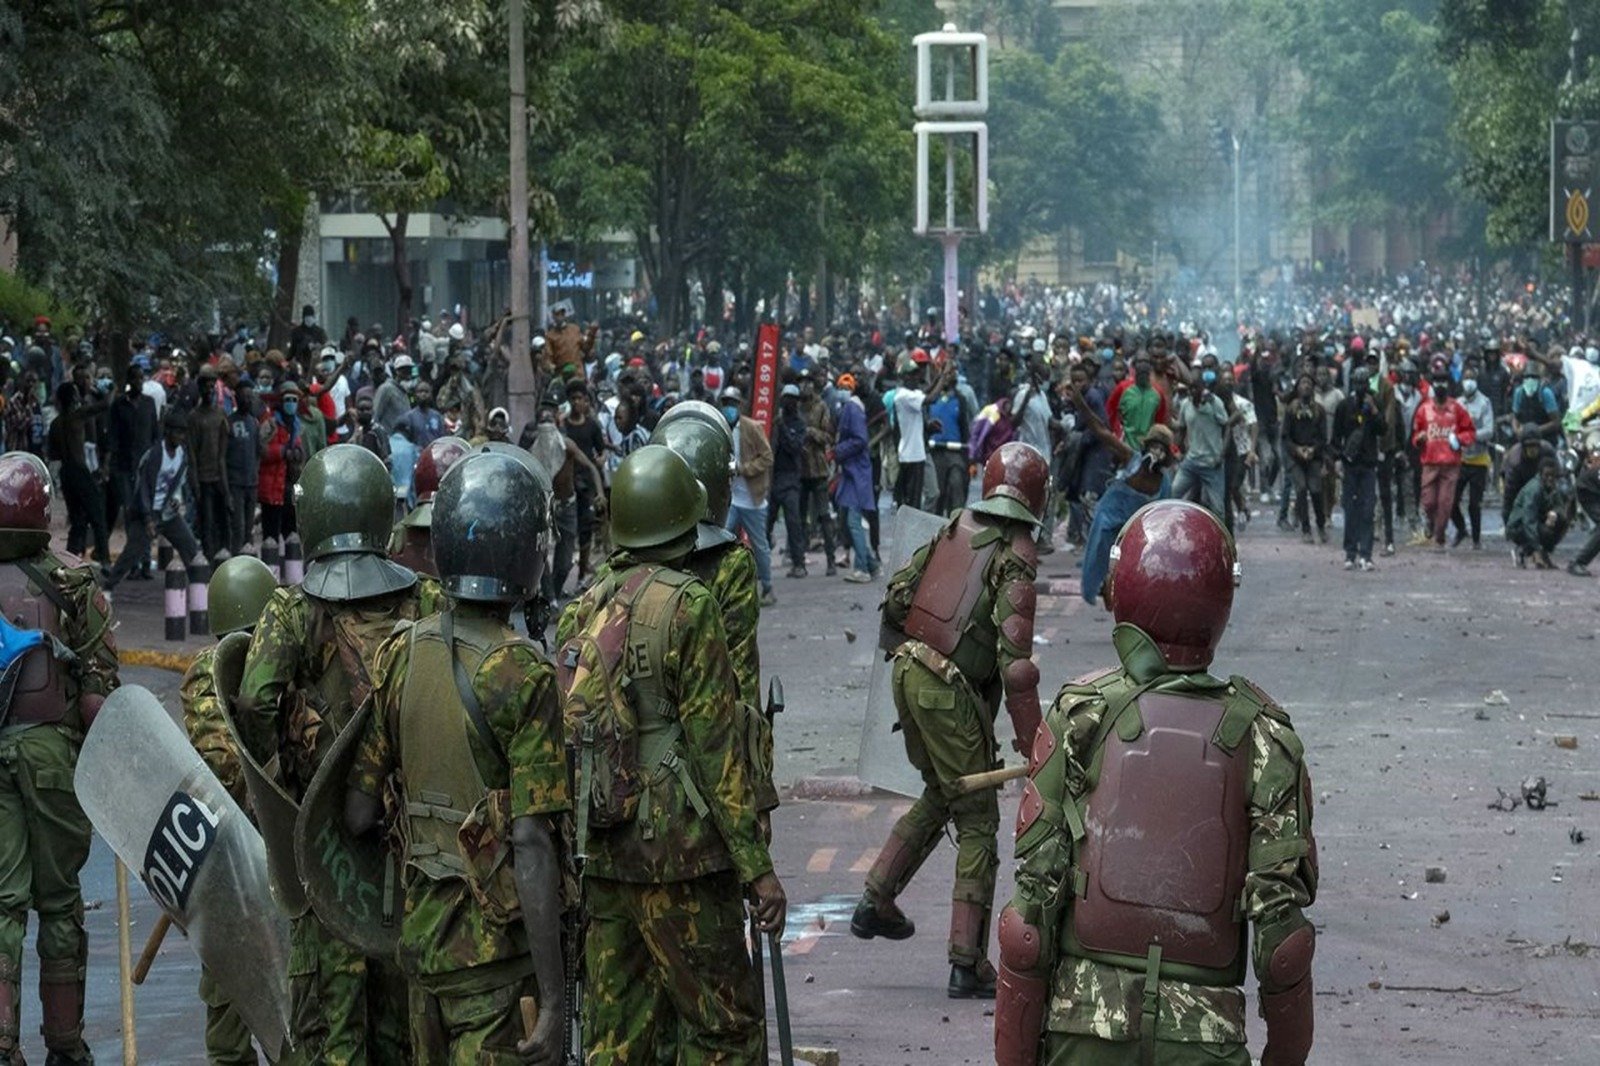 The June 25 Rage in Kenya, which Country is Next?